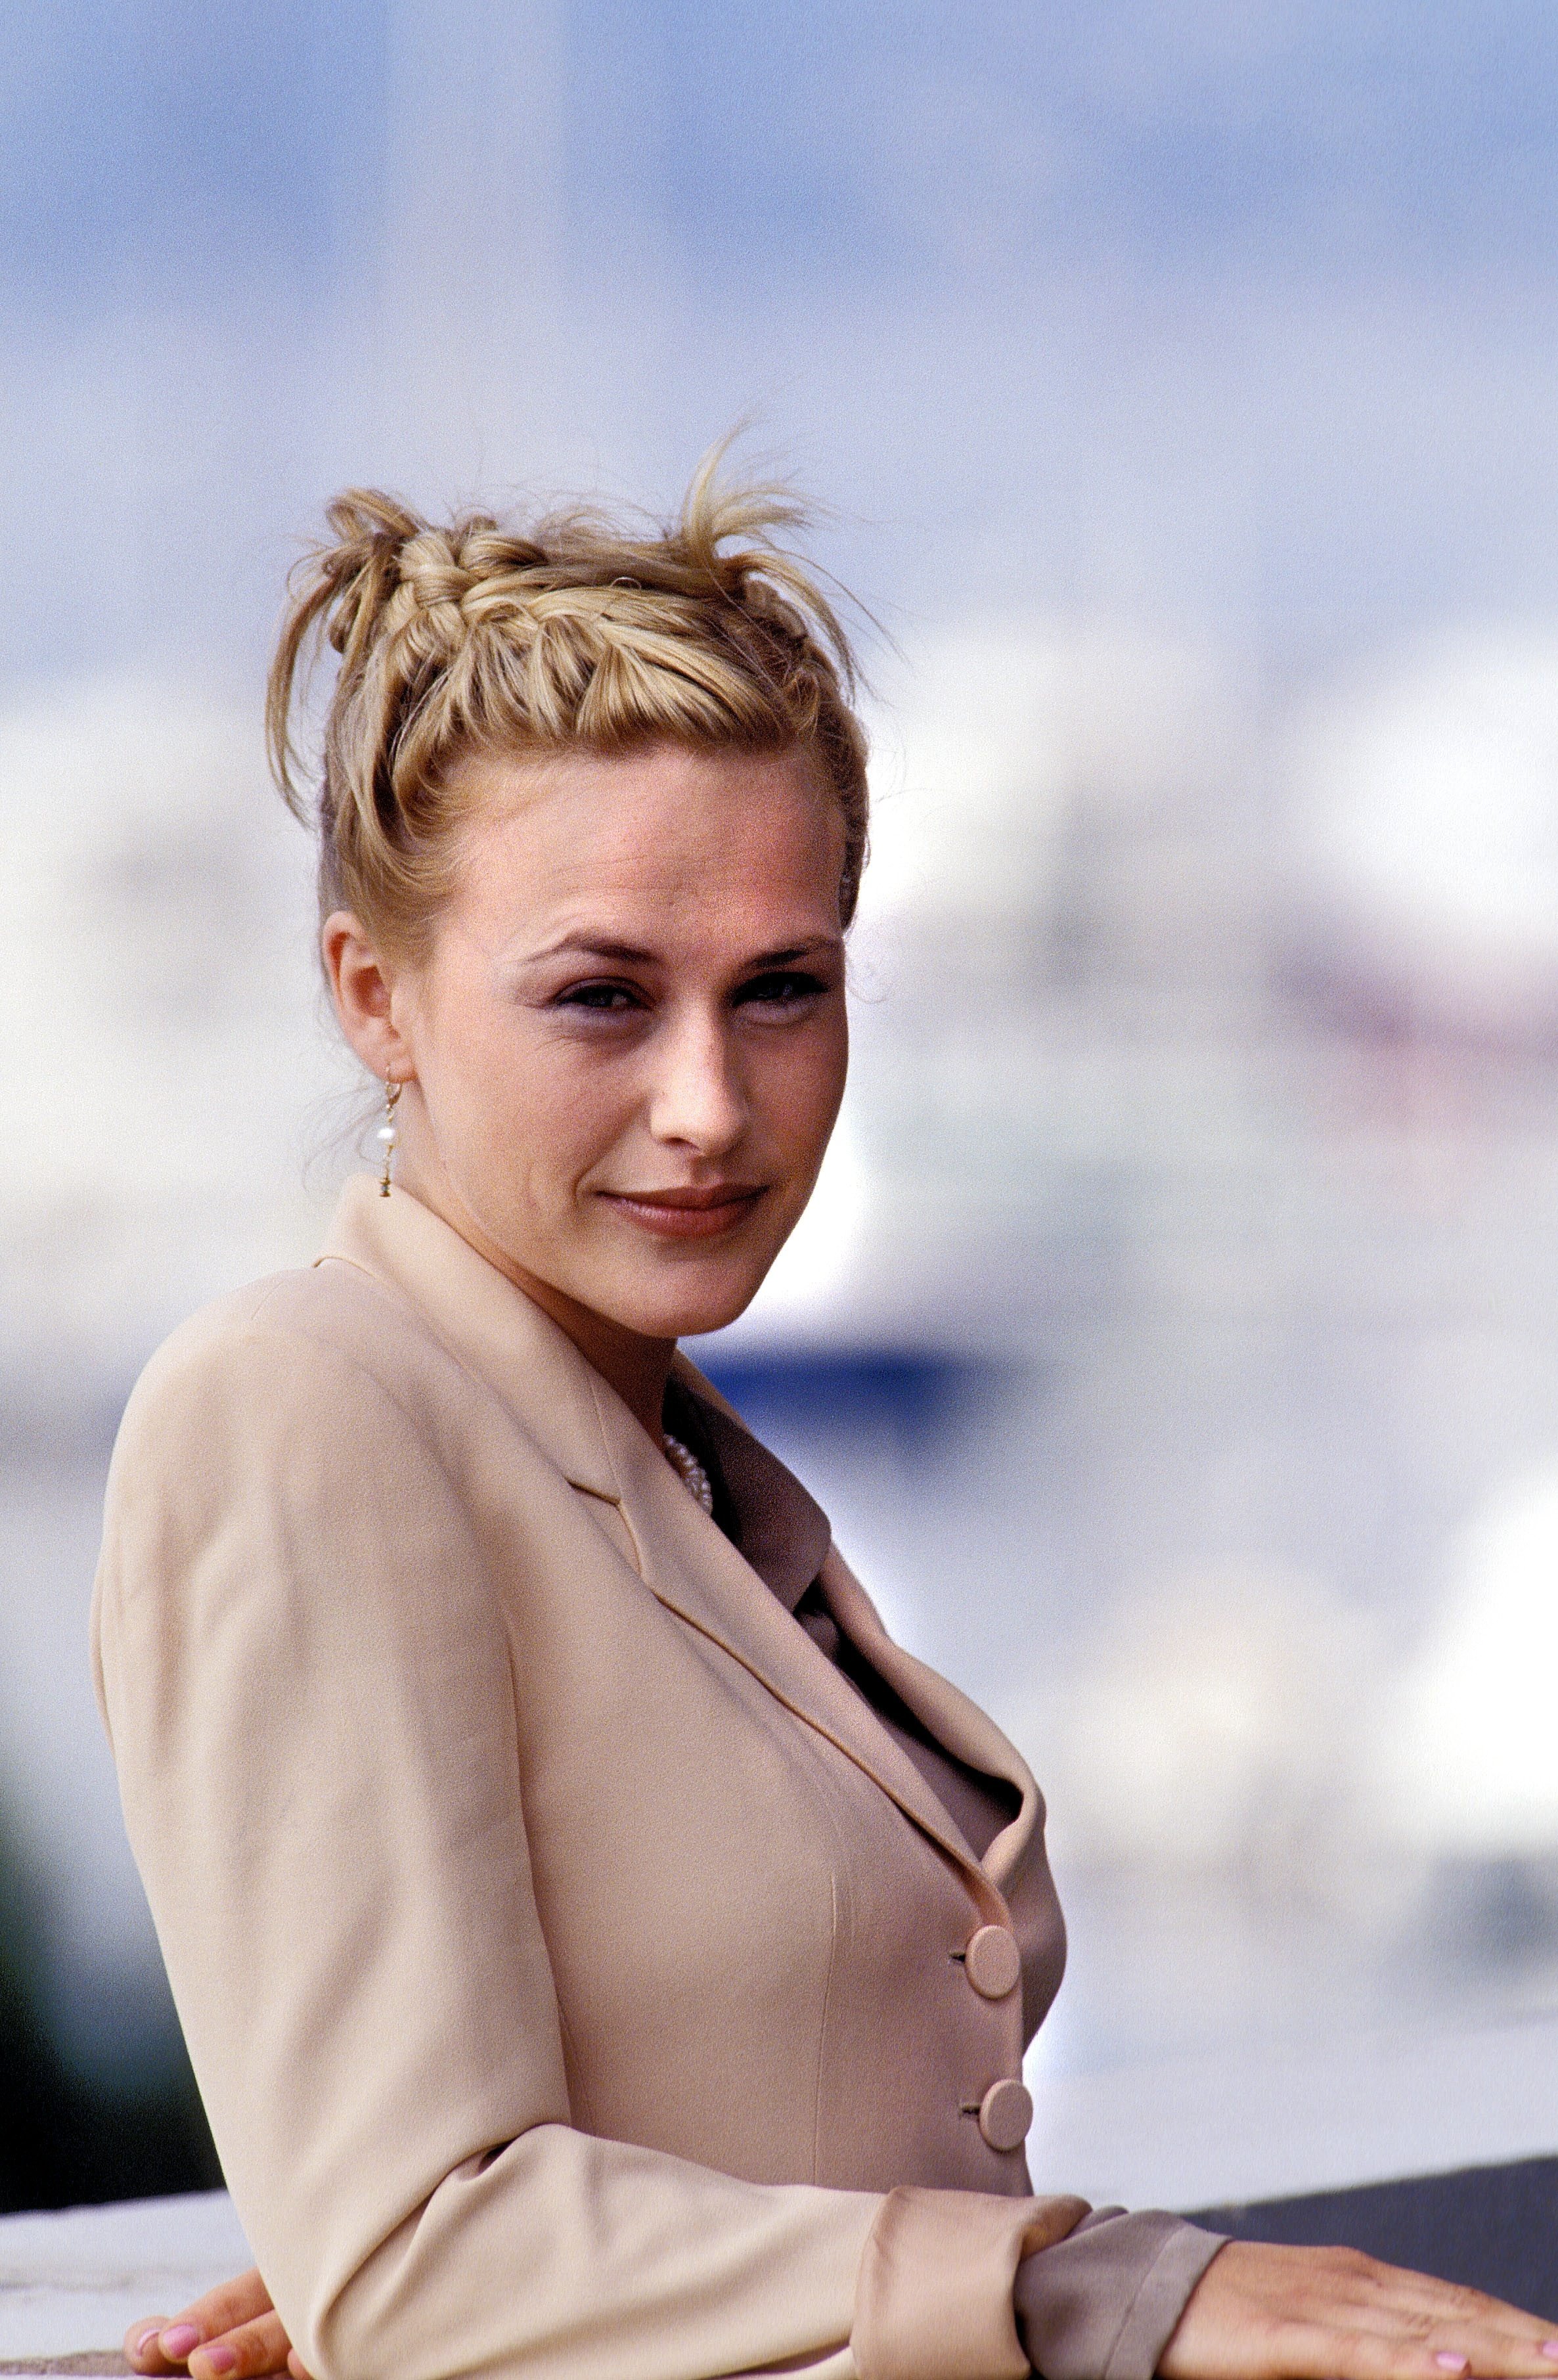 Patricia Arquette in a photocall for "Beyond Rangoon" in Cannes, France, on May 19, 1995. | Source: Getty Images